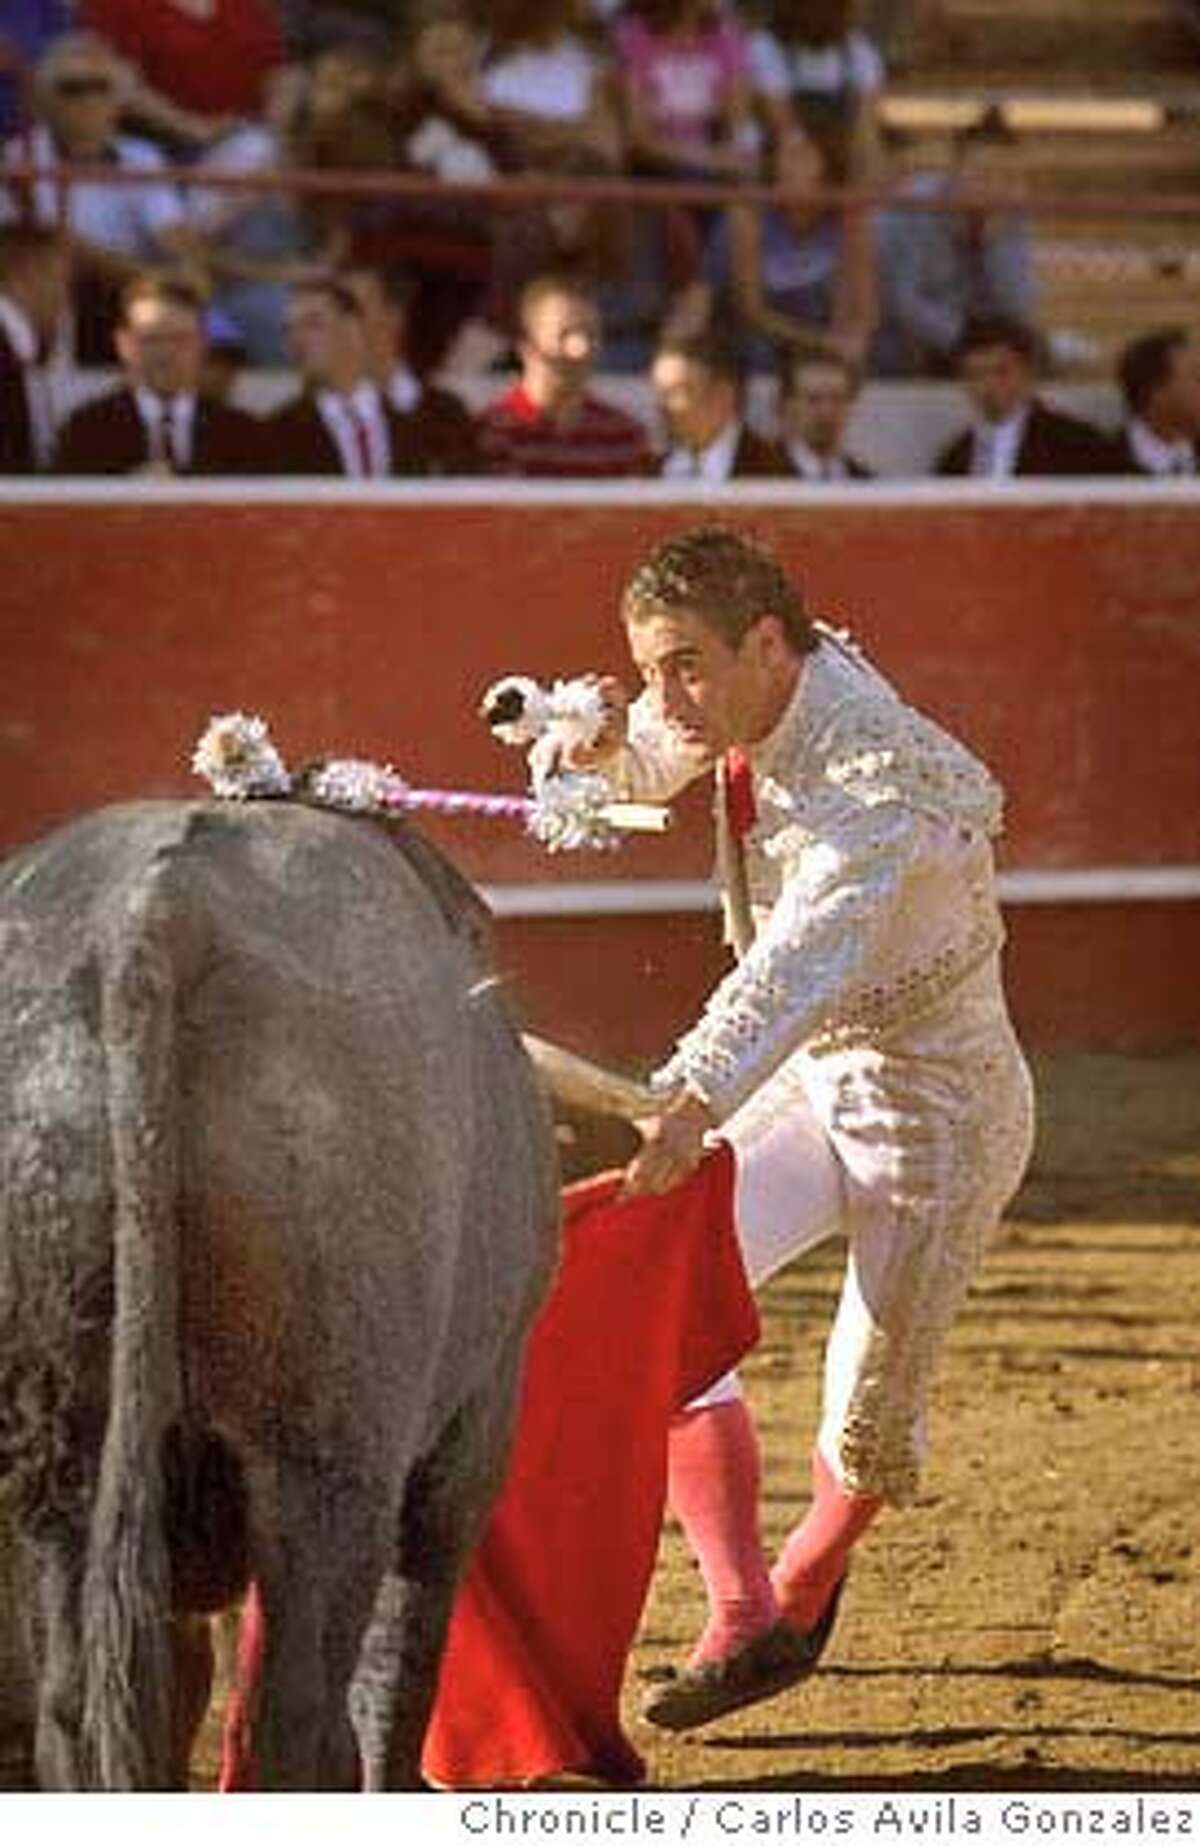 California's 'bloodless bullfights' keep Portuguese tradition alive